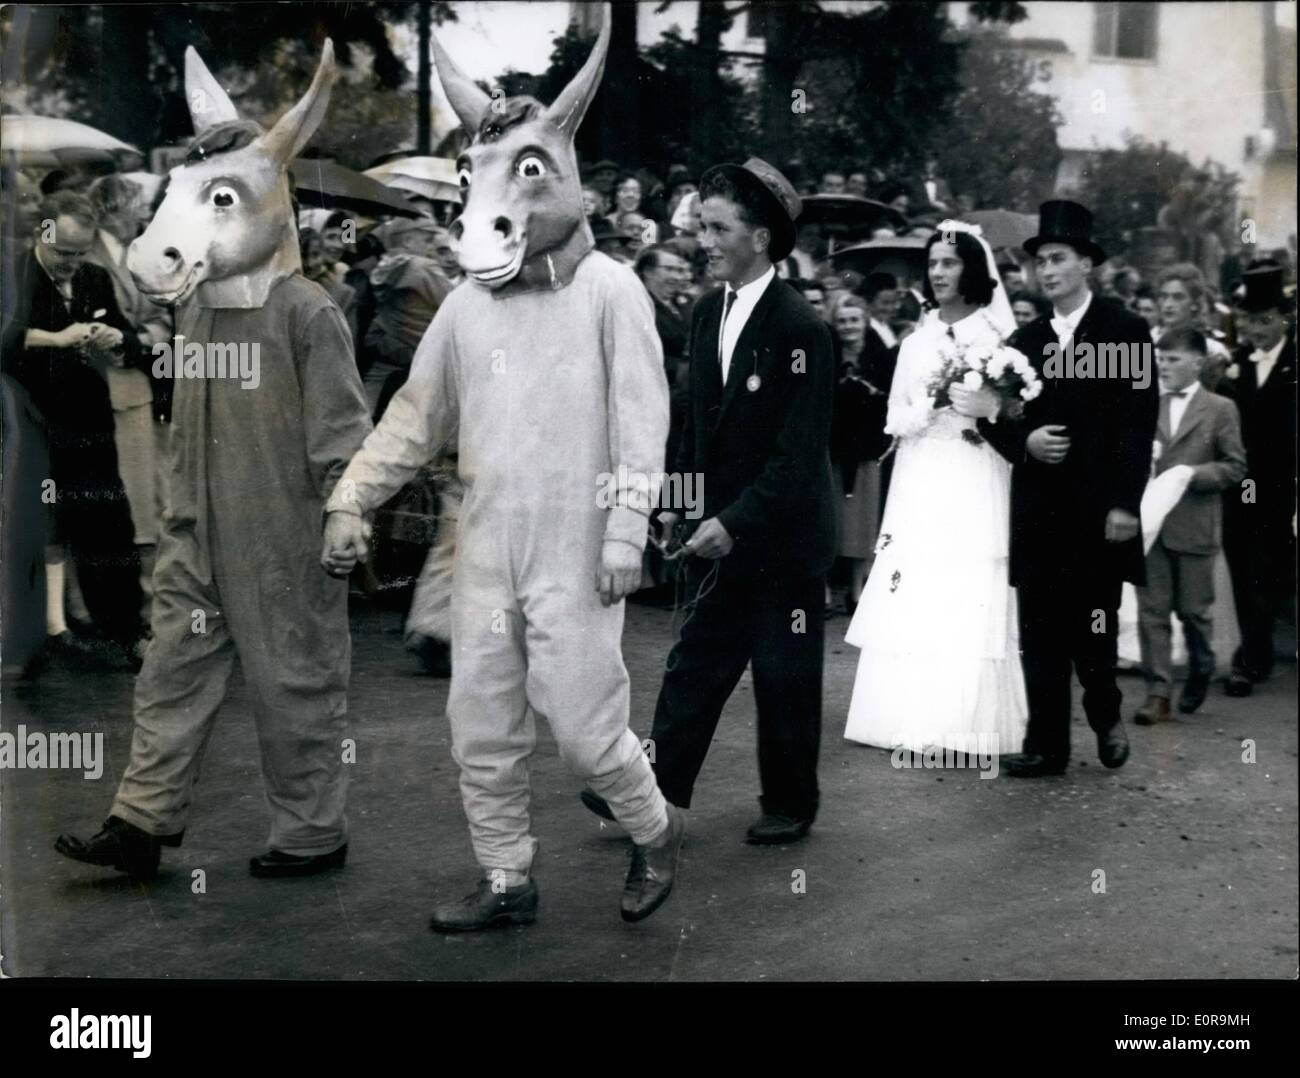 Sep. 09, 1958 - 'Donkey-weding' inspite of judicial prohibition: Also called ''donkey-weeding' as official defamation of a young couple attired many people in the little place Huetten in the Eifel-mountains. The youth in Huetten was not satisfied with the 'som' which the young husband paid for his wife, who was born in Heetten and arranged inspite of a judicial prohibition according to an old custom 'a donkey wedding' to pillo the young couple. Photo Shows Two young fellow dressed as donkeys leading the young couple through the streets of Hetten. Stock Photo